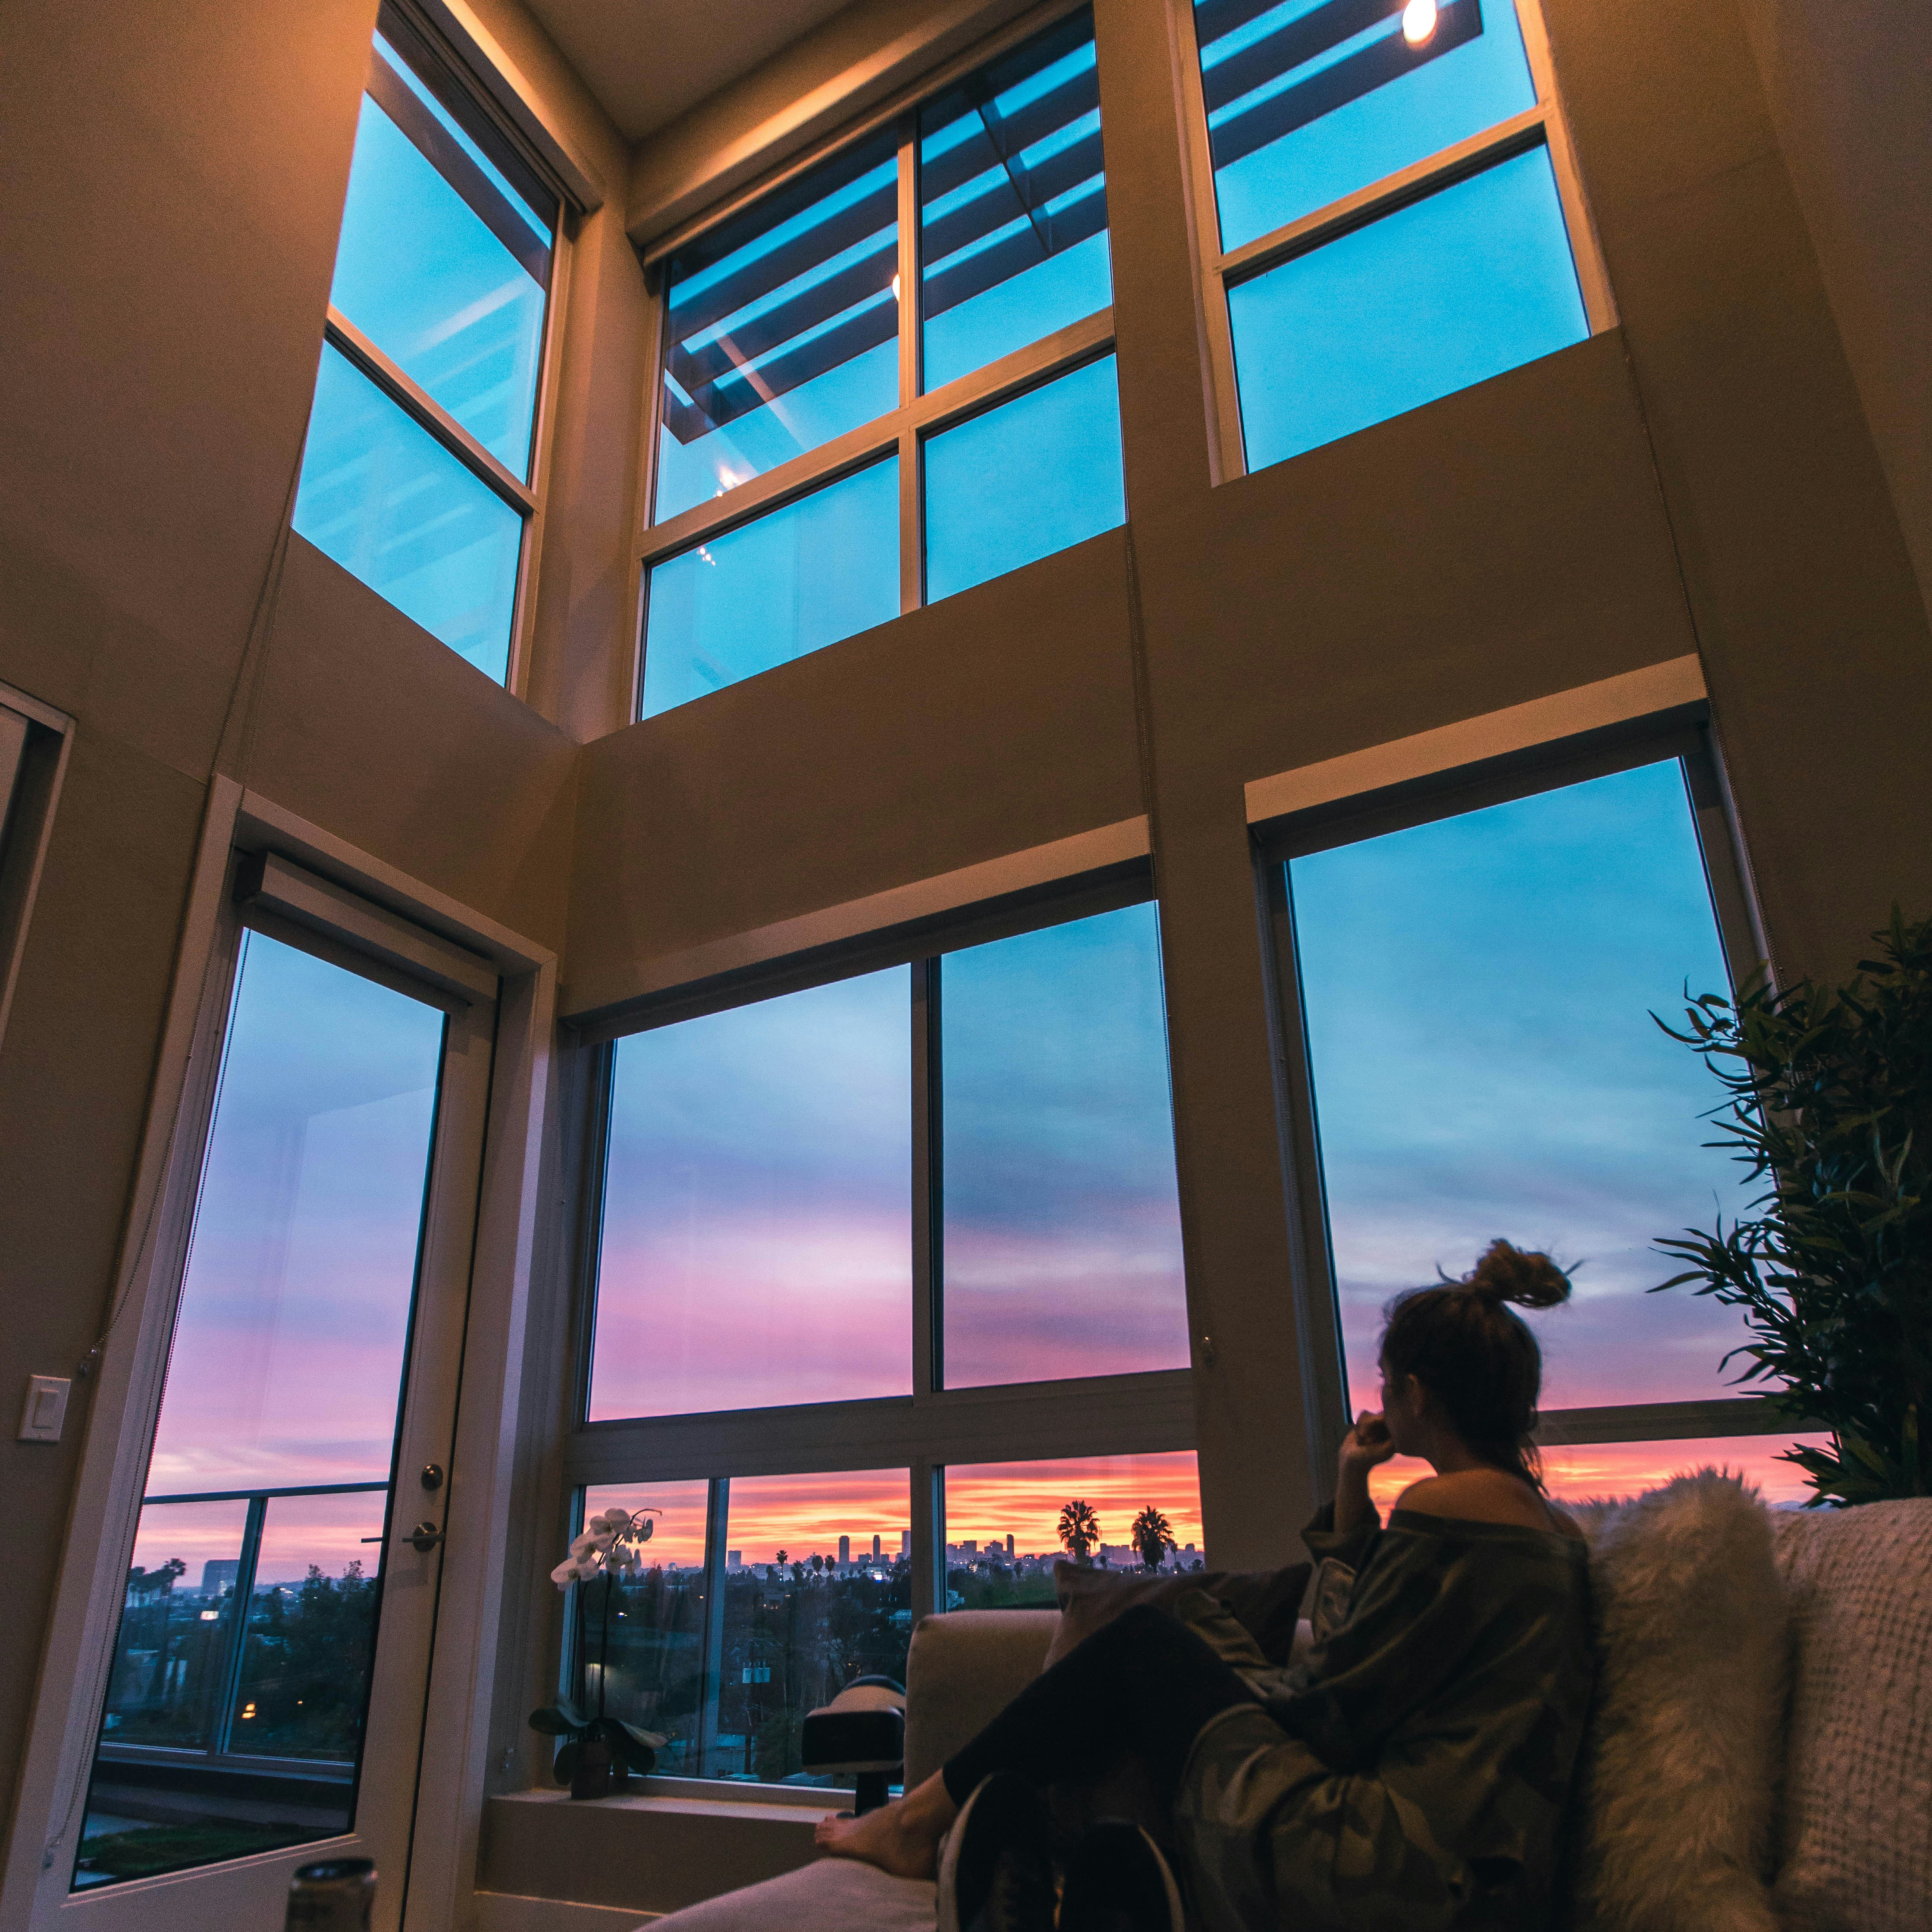 a person sitting on a couch looking out a window